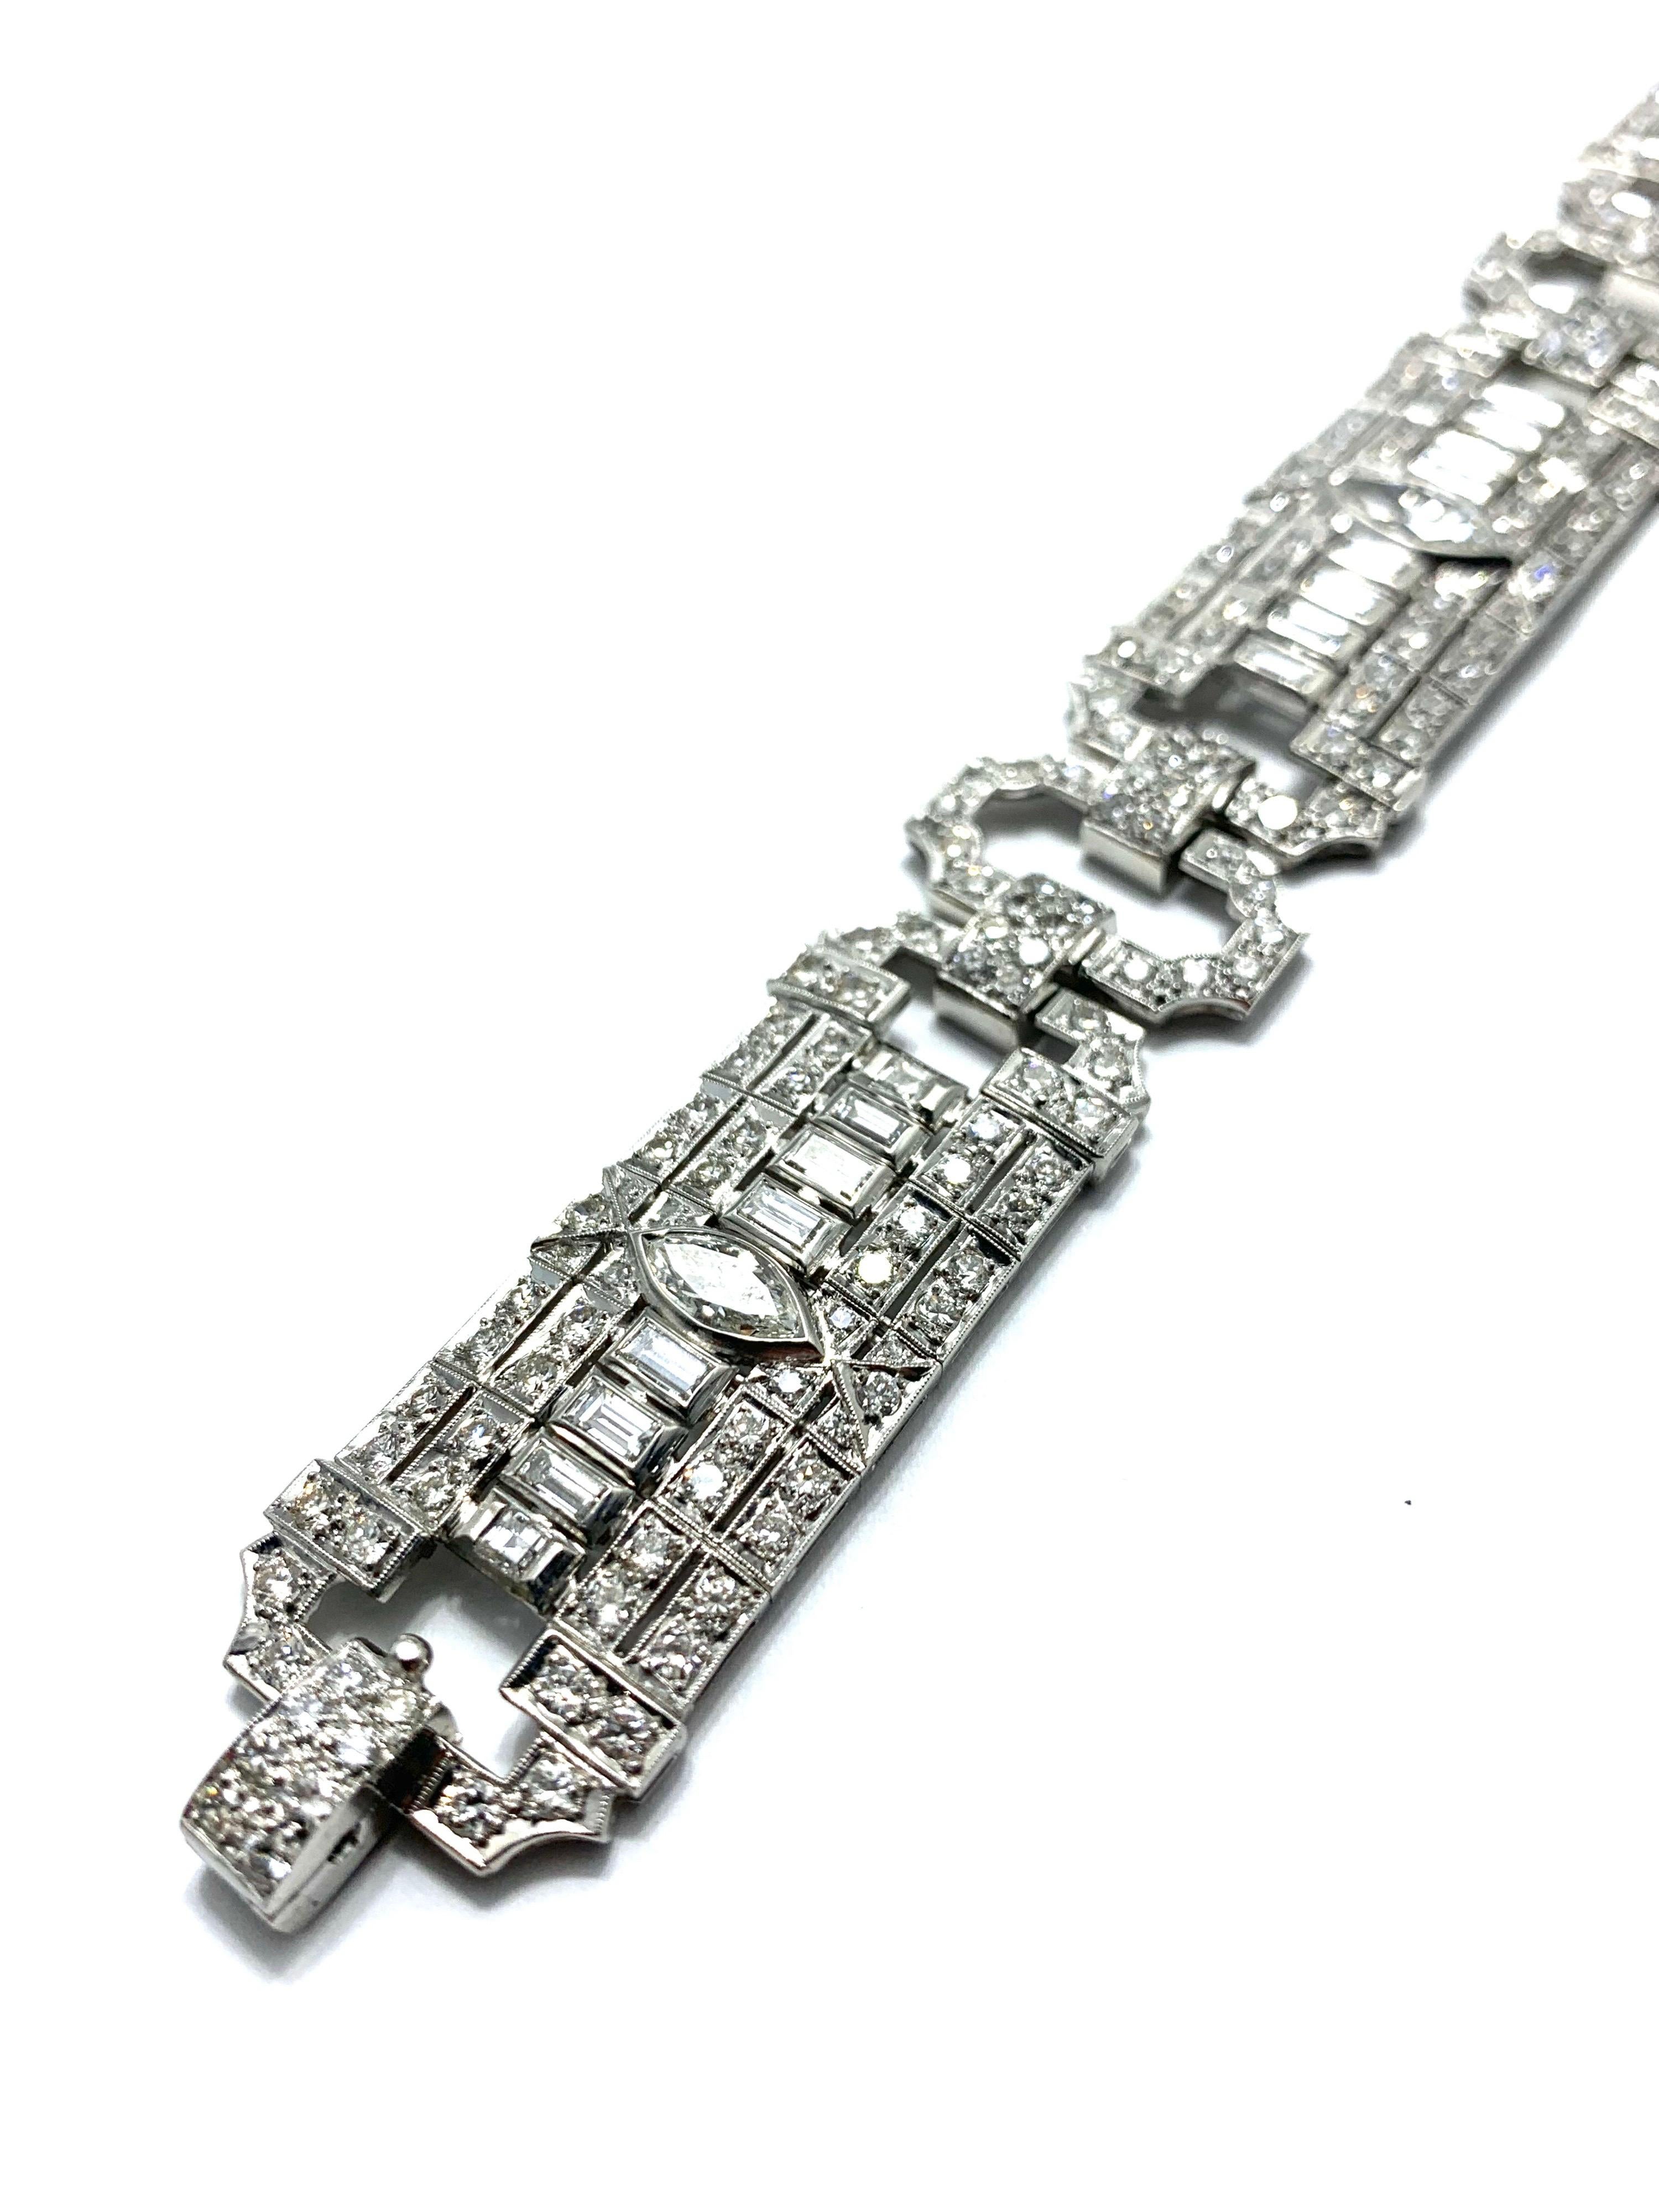 This is a craftsmanship at it's best.  A 10.25 carat Art Deco style period platinum bracelet.  The bracelet consists of round, baguette, and marquise Diamonds.  The Diamonds are graded as G color, VS clarity.  The center Marquise diamond is 1.01